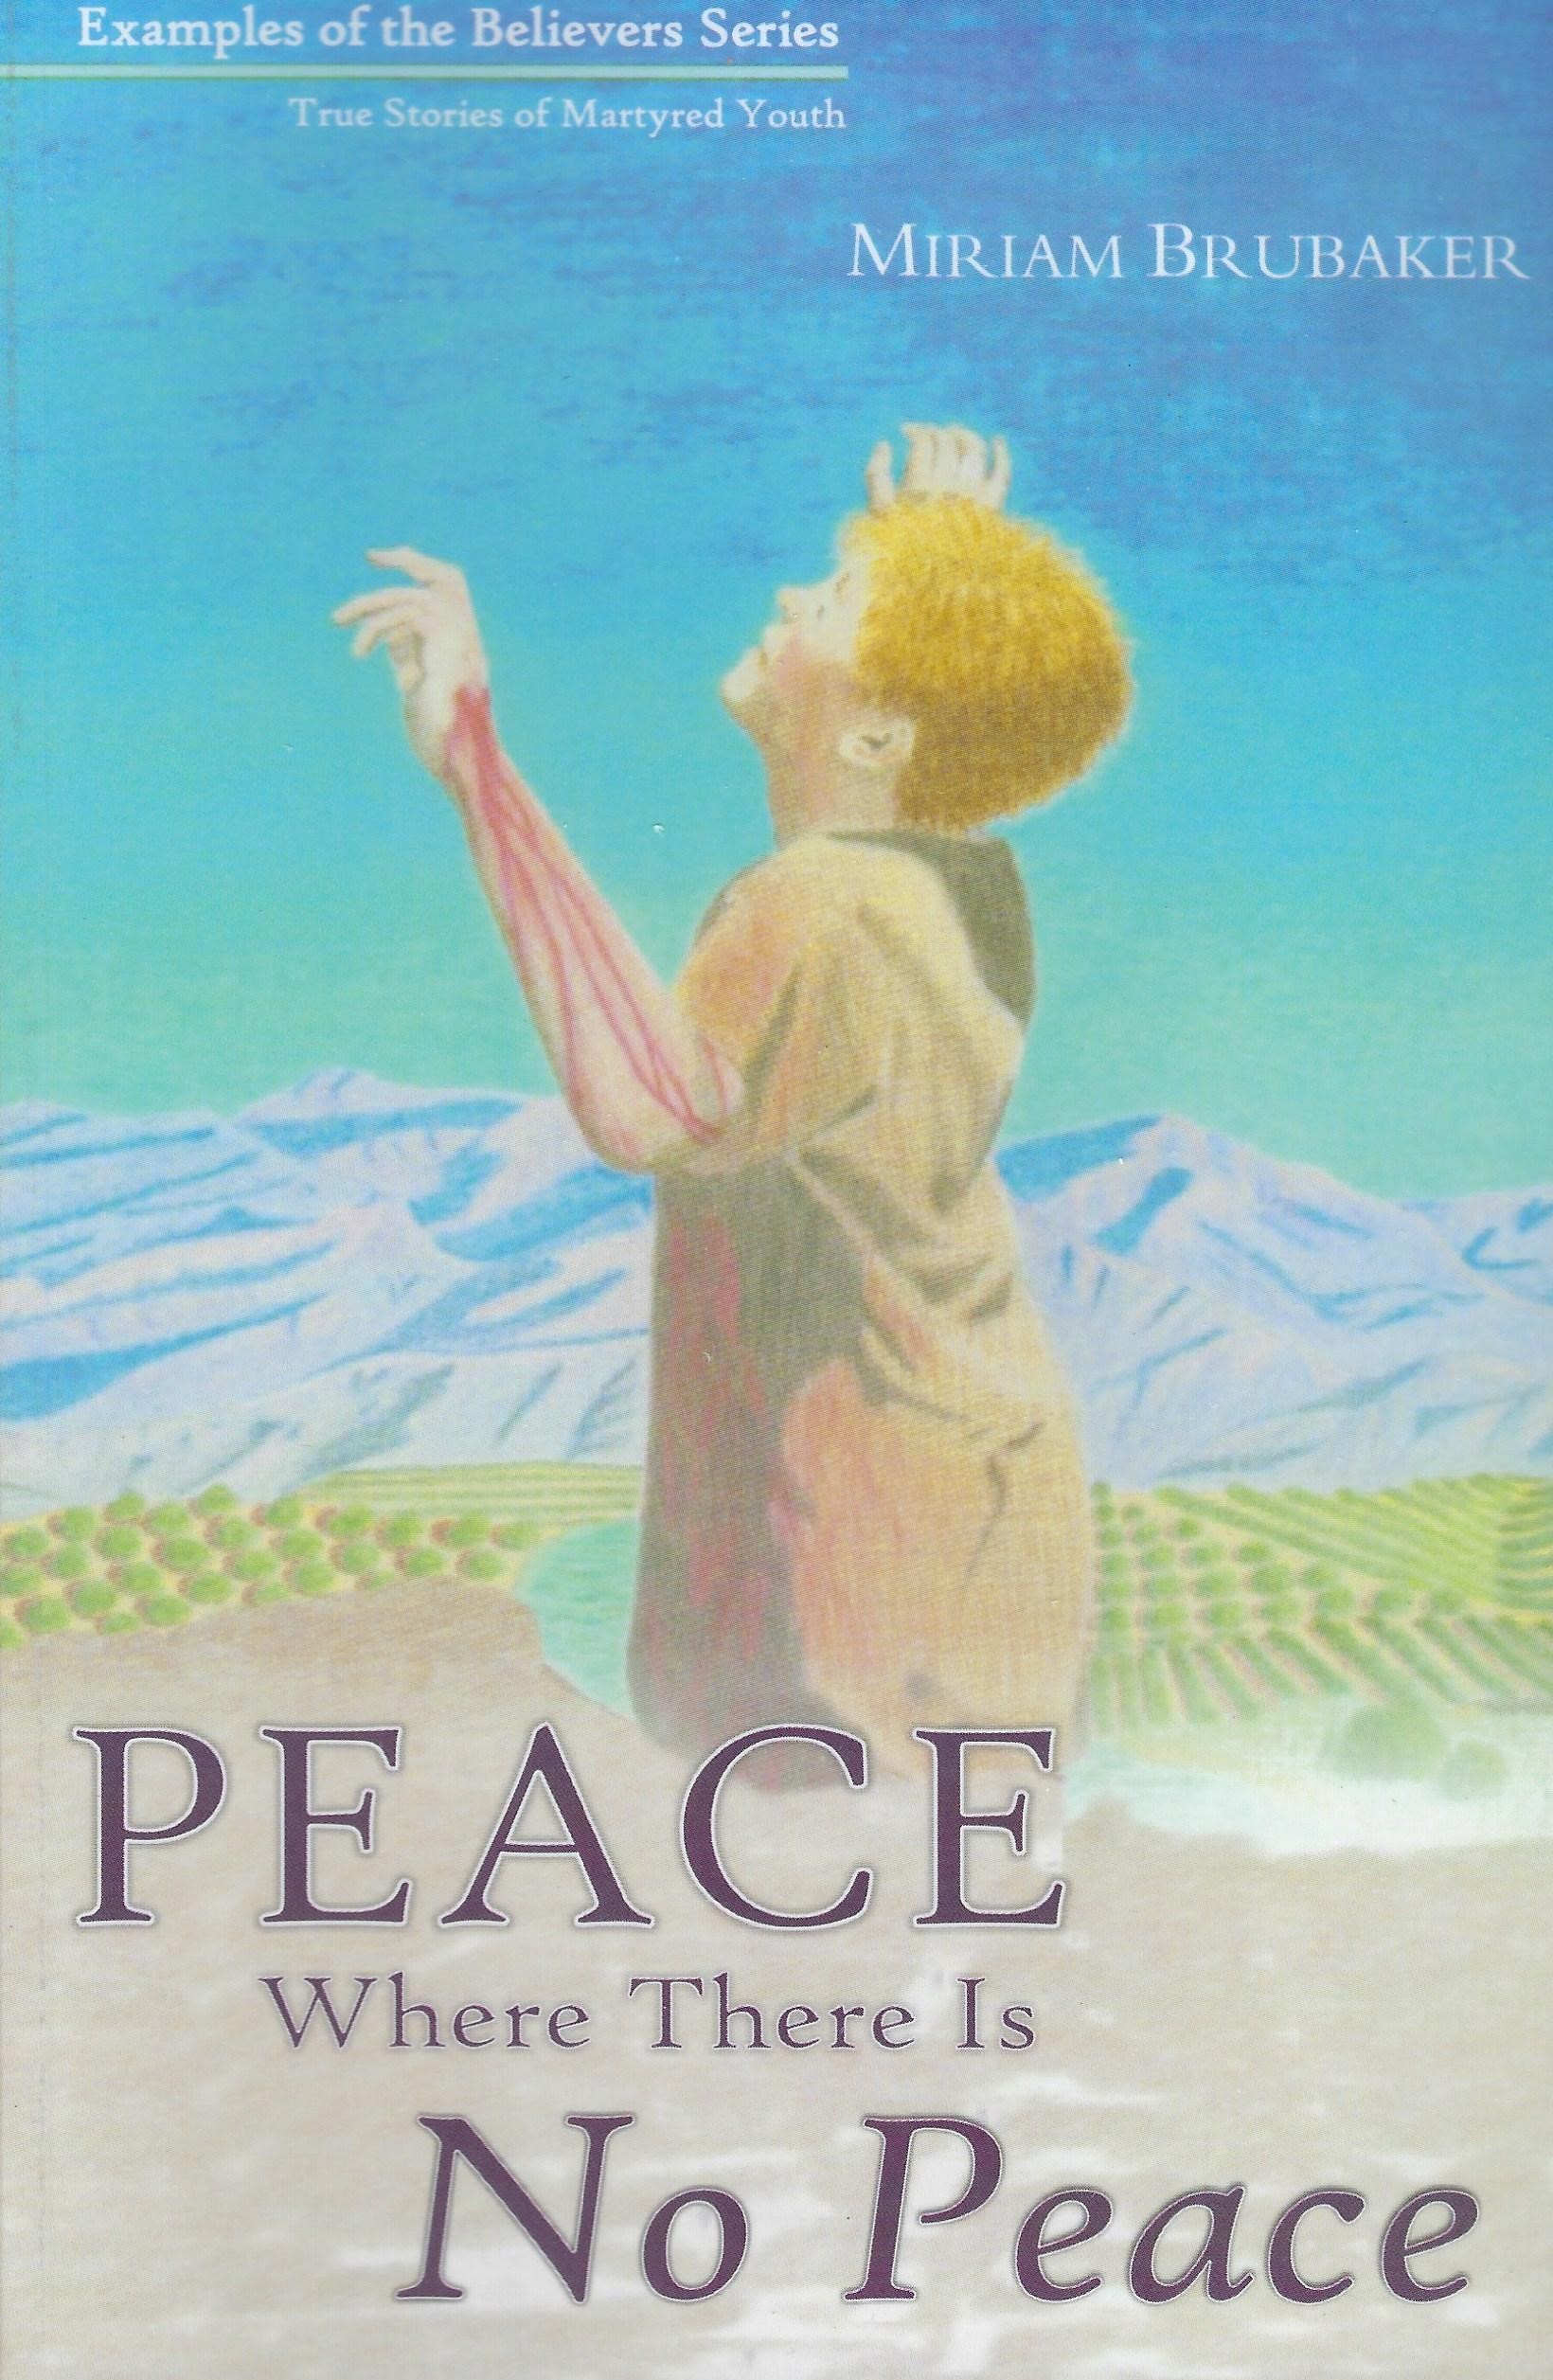 PEACE WHERE THERE IS NO PEACE Miriam Brubaker